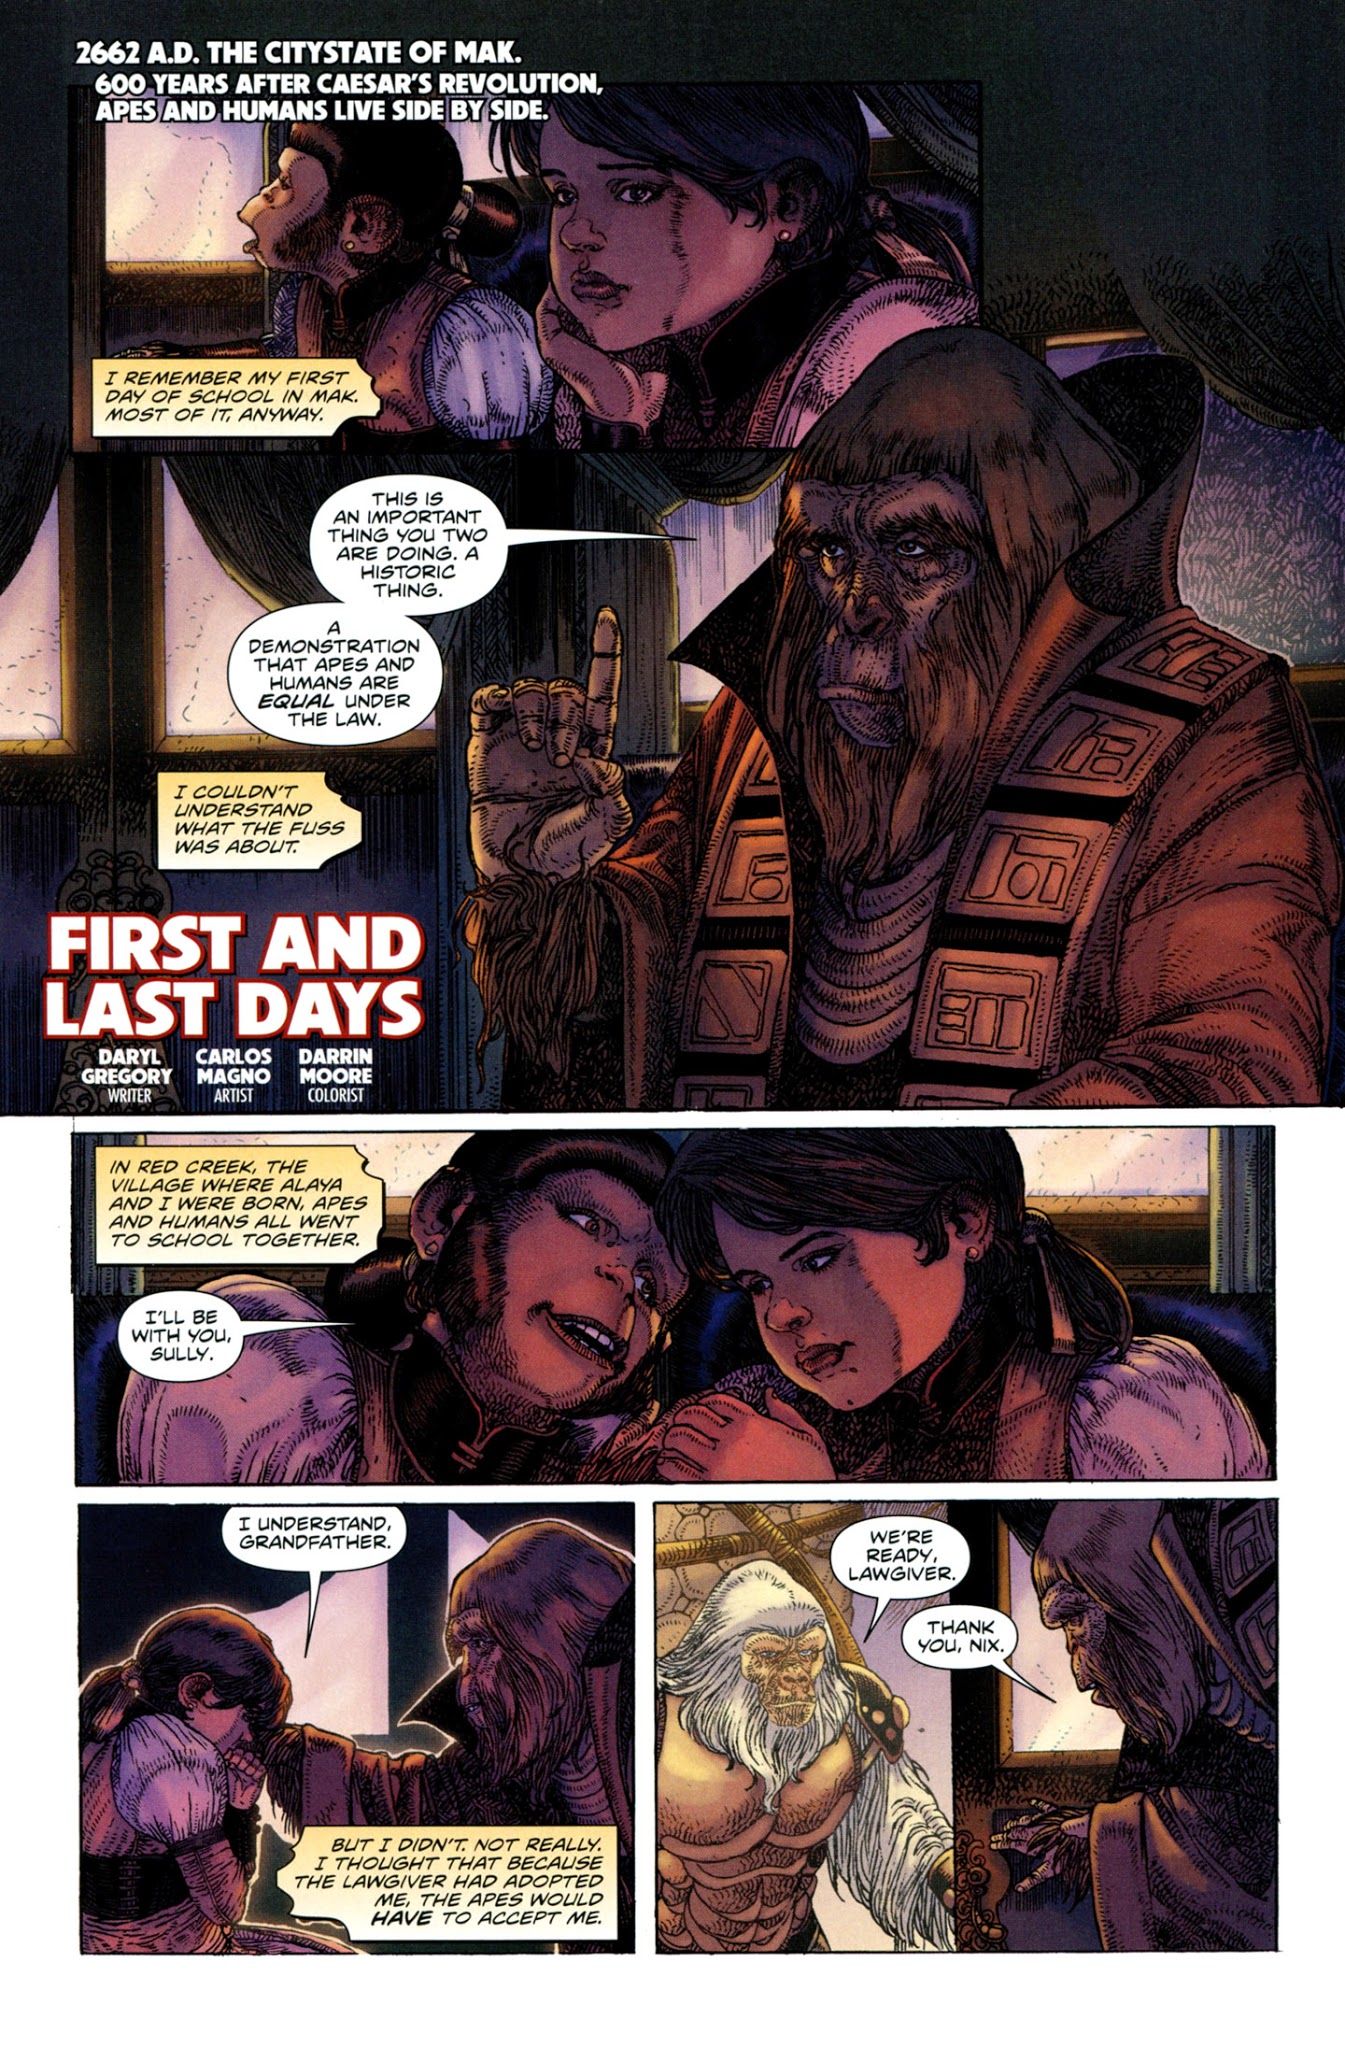 1345px x 2048px - Planet Of The Apes 2011 Annual 1 | Read Planet Of The Apes 2011 Annual 1  comic online in high quality. Read Full Comic online for free - Read comics  online in high quality .|viewcomiconline.com